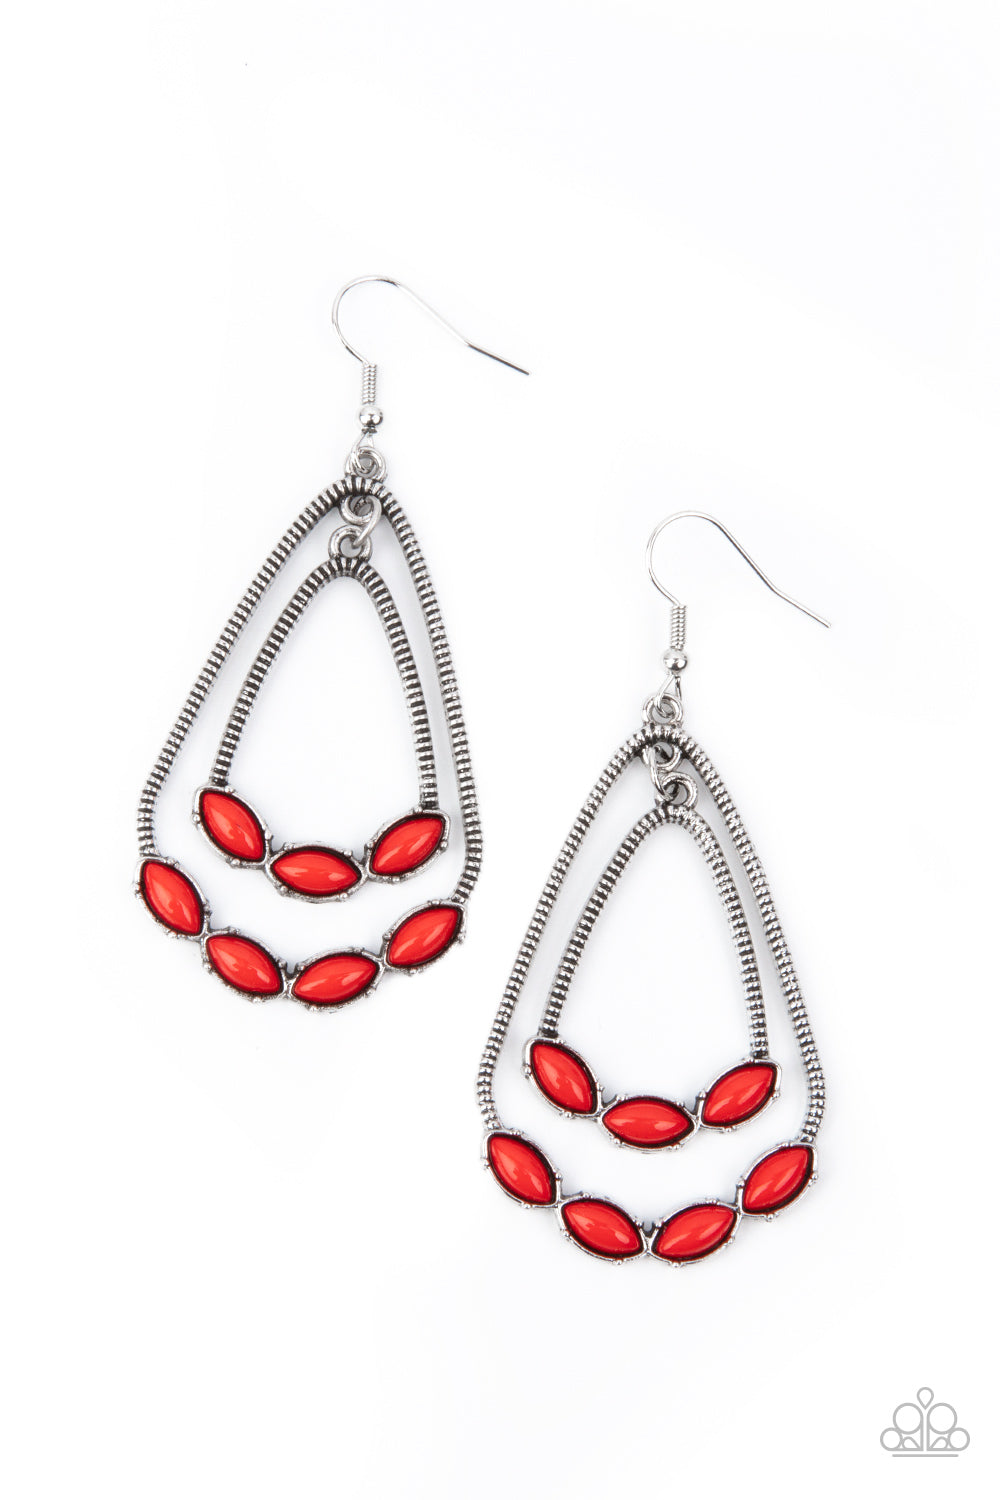 Paparazzi ♥ Summer Staycation - Red ♥ Earrings